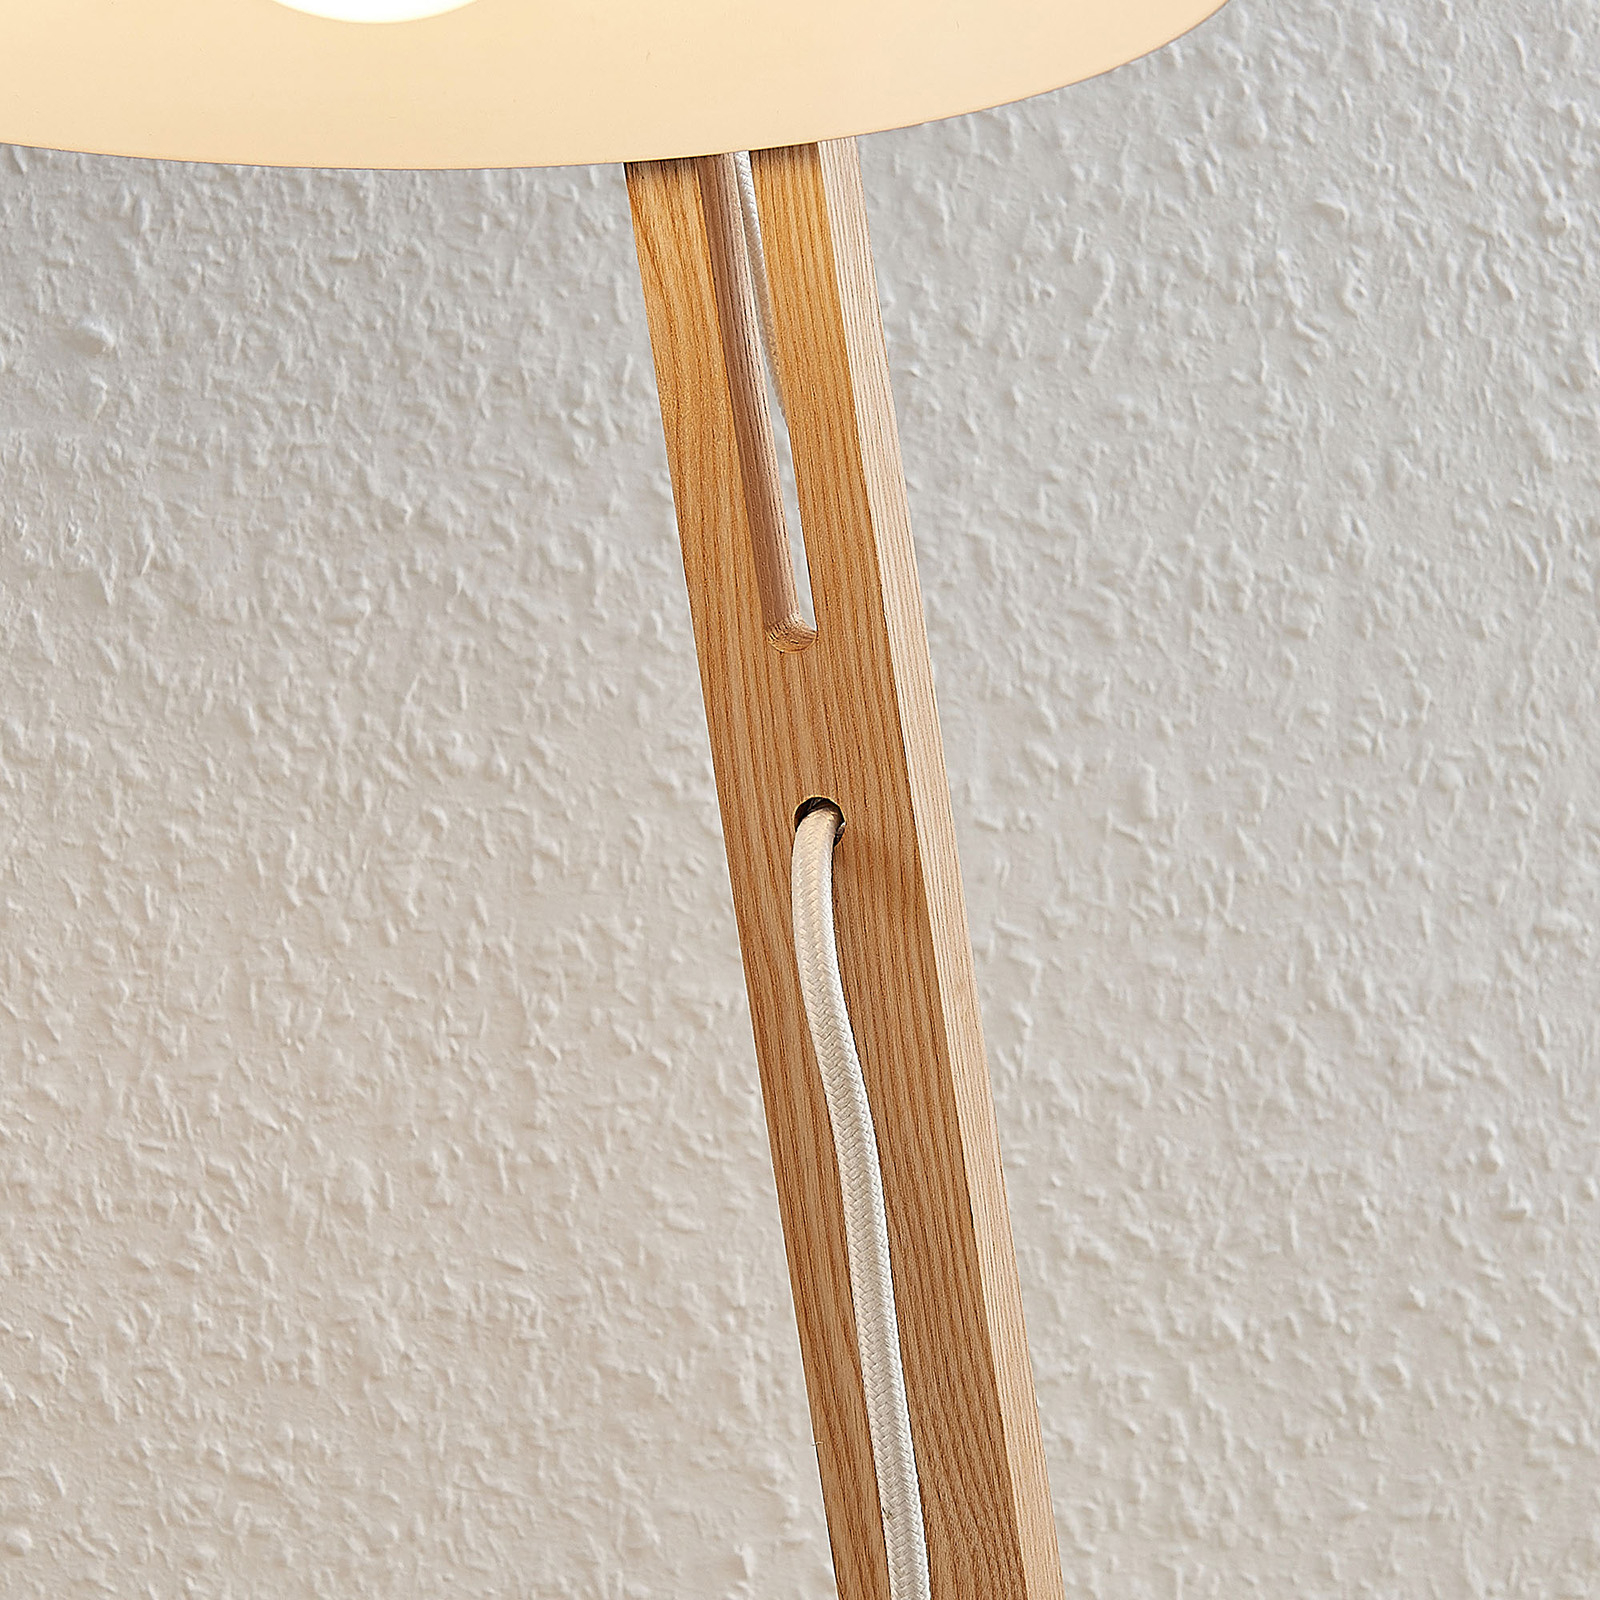 Lindby Tetja table lamp with wooden rod, white